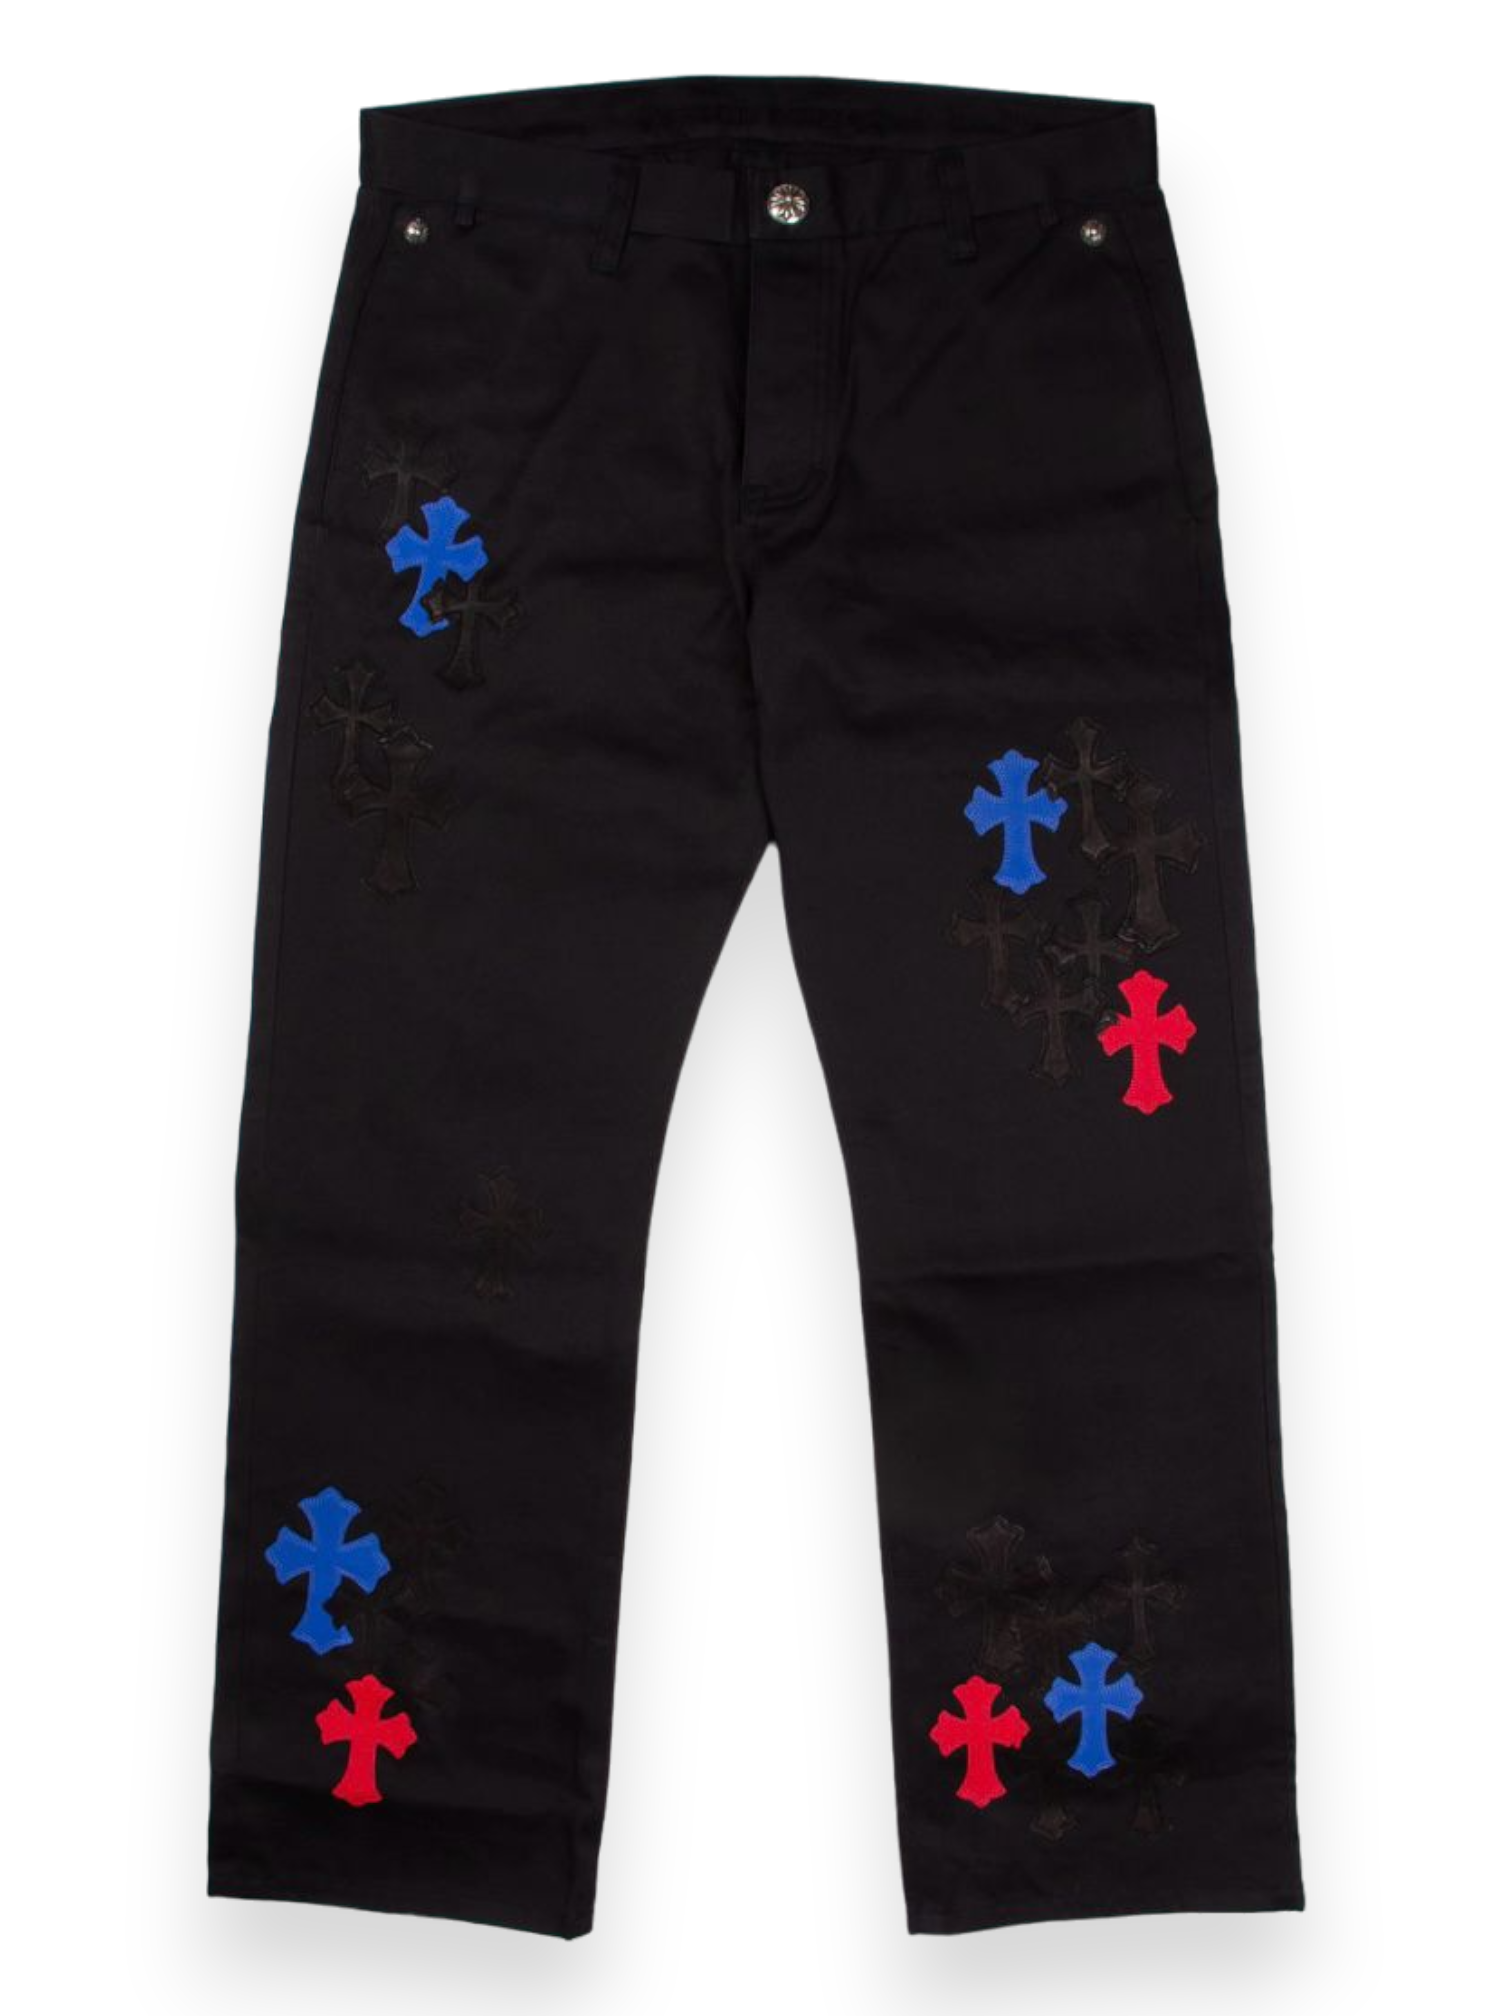 Chrome Hearts Blue Red Cross Patch Black Chinos